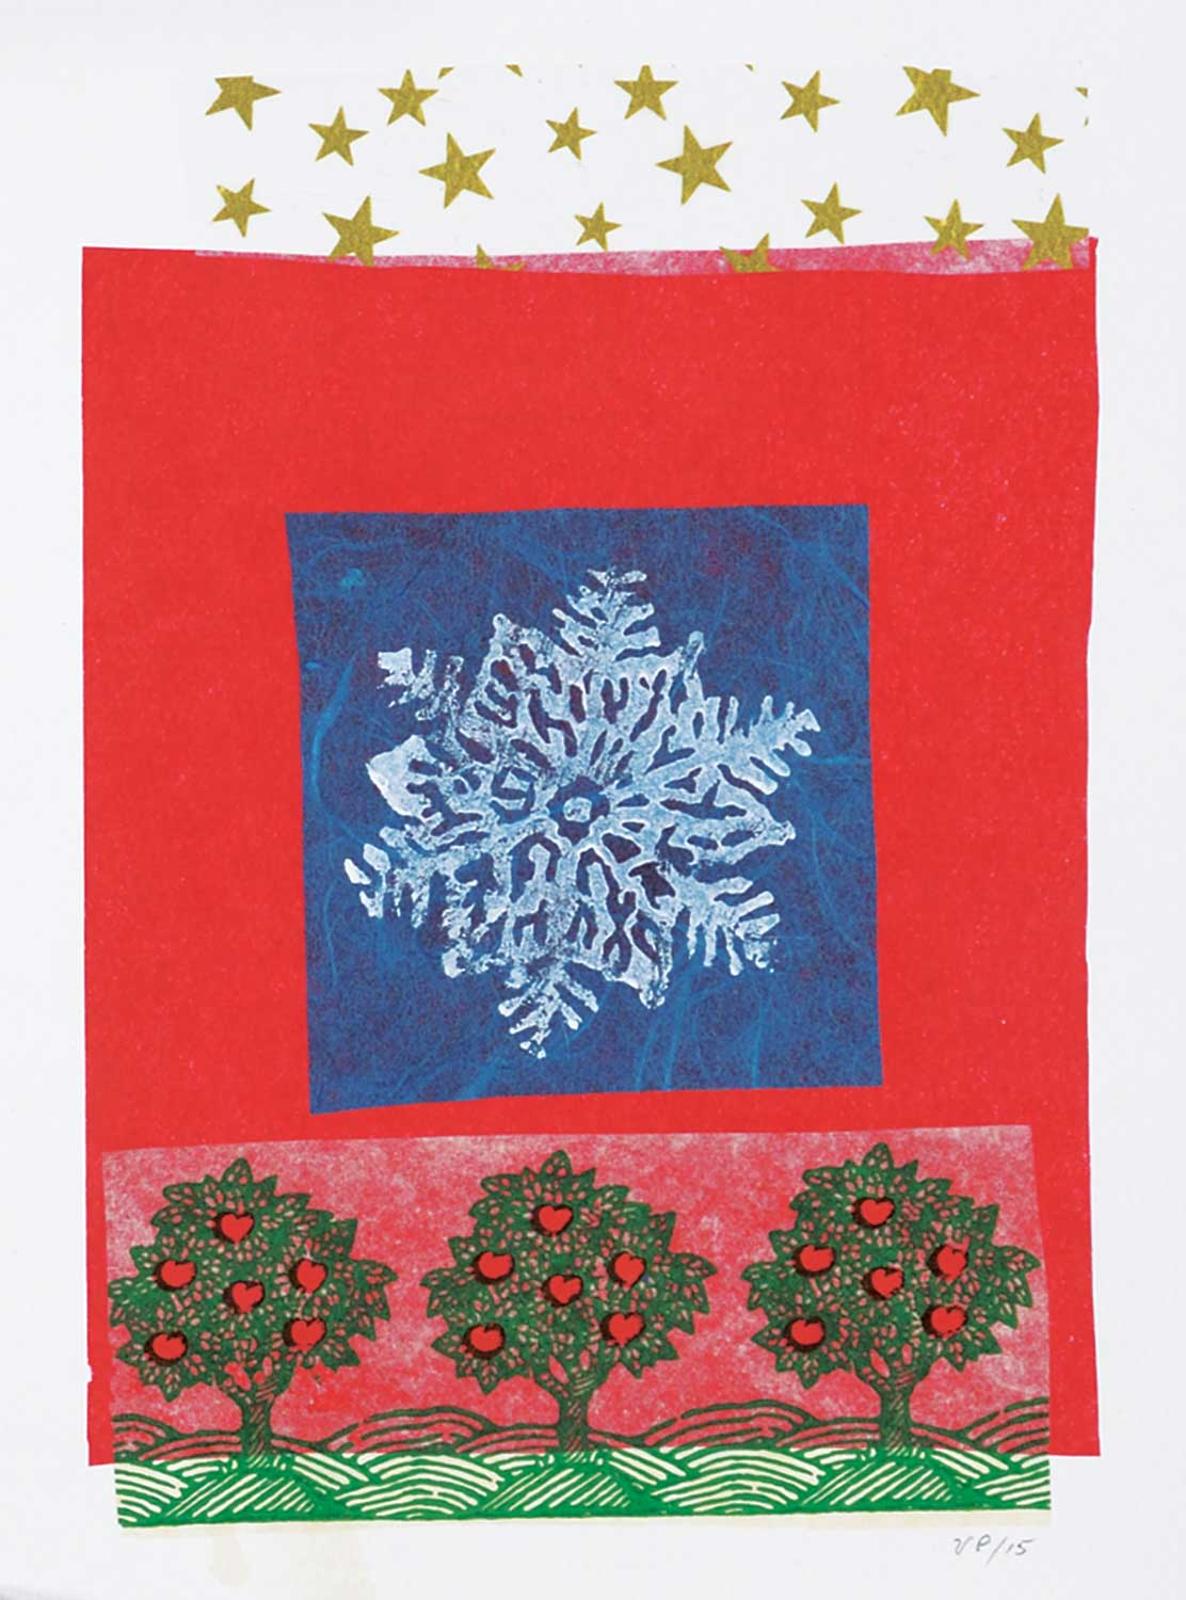 Veronica Plewman - Untitled - Snowflake over Heart Trees